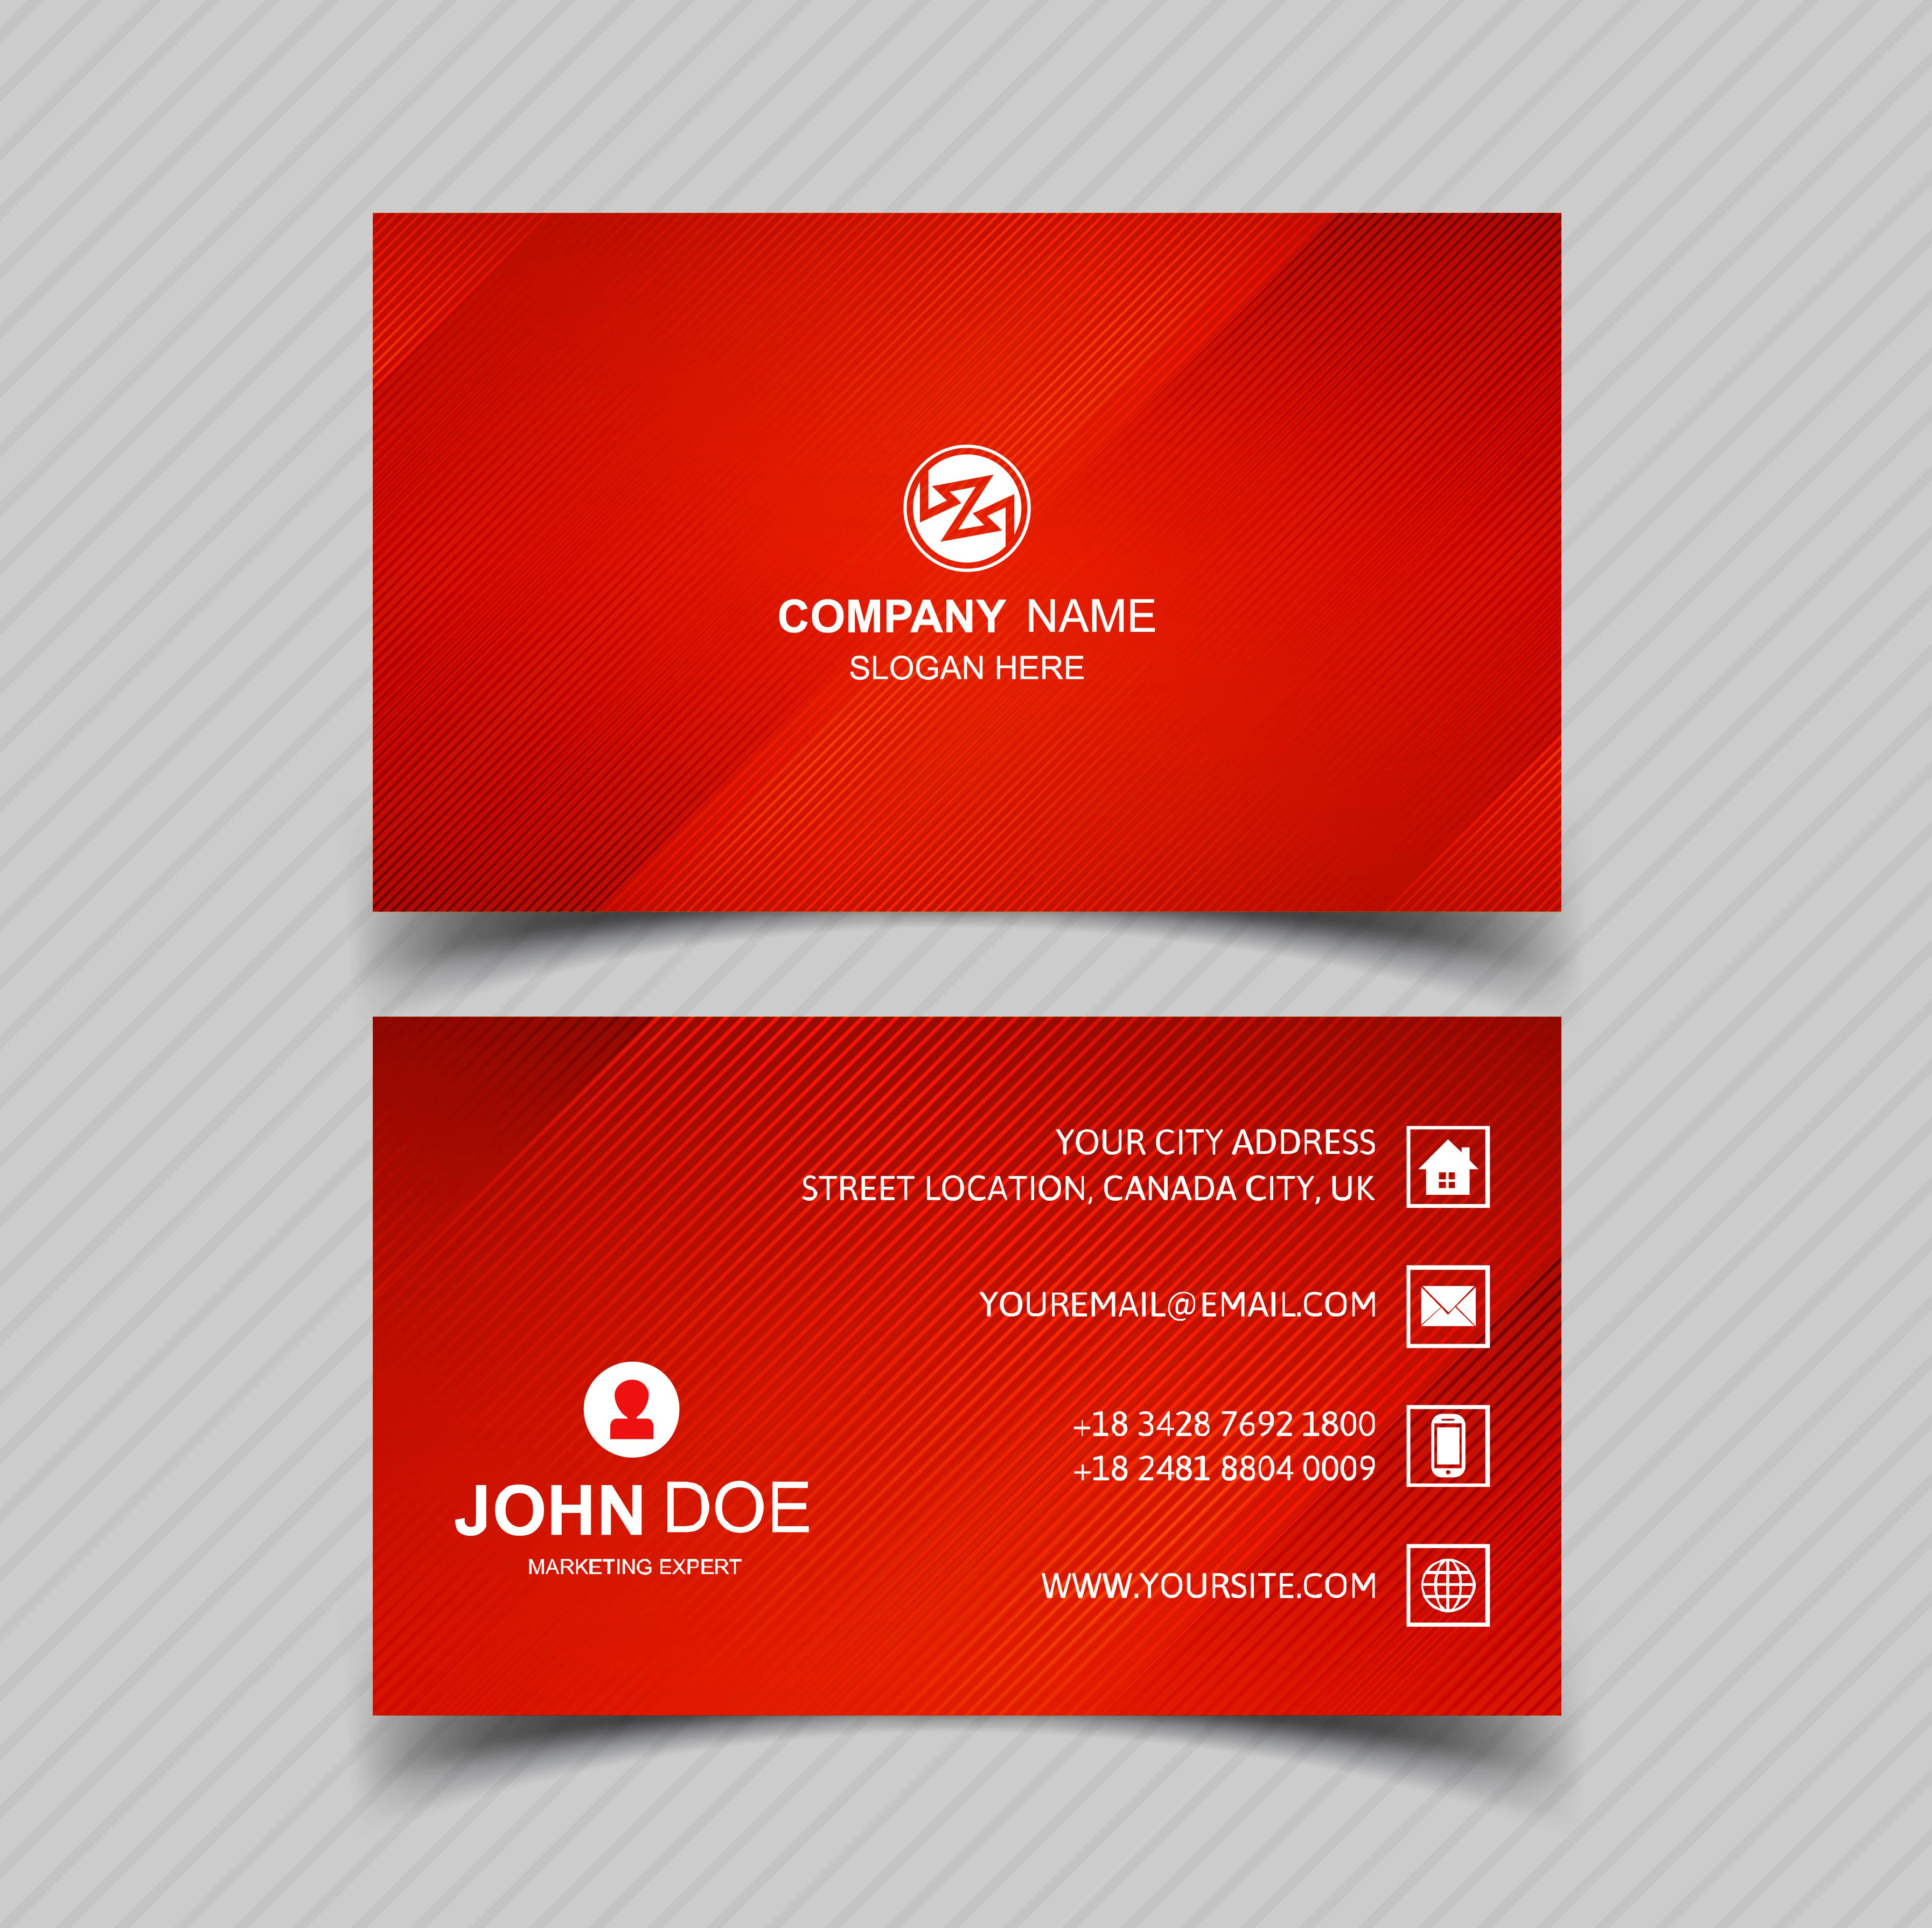 Templates For Visiting Cards Free Downloads